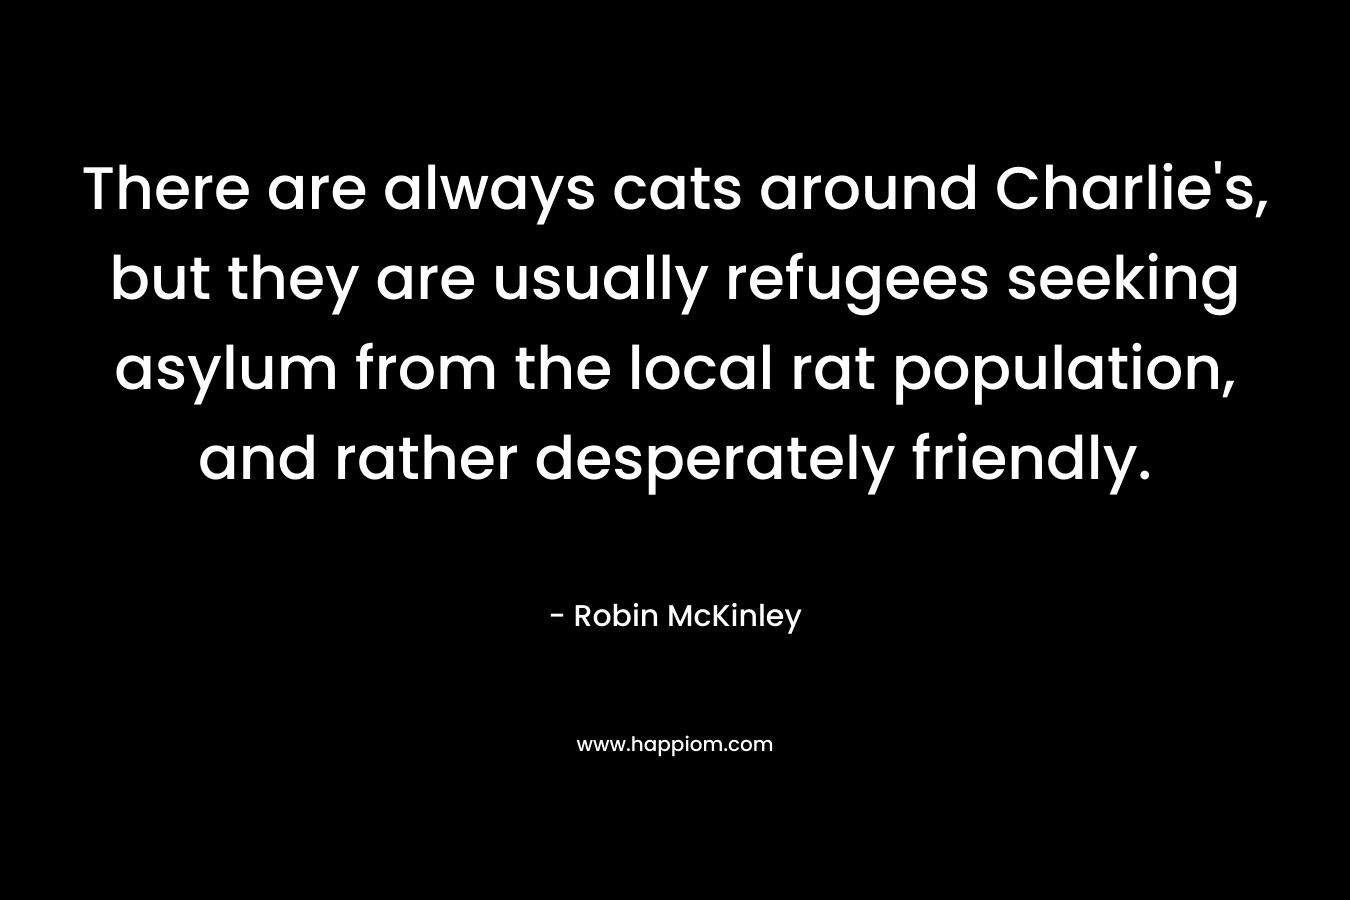 There are always cats around Charlie’s, but they are usually refugees seeking asylum from the local rat population, and rather desperately friendly. – Robin McKinley